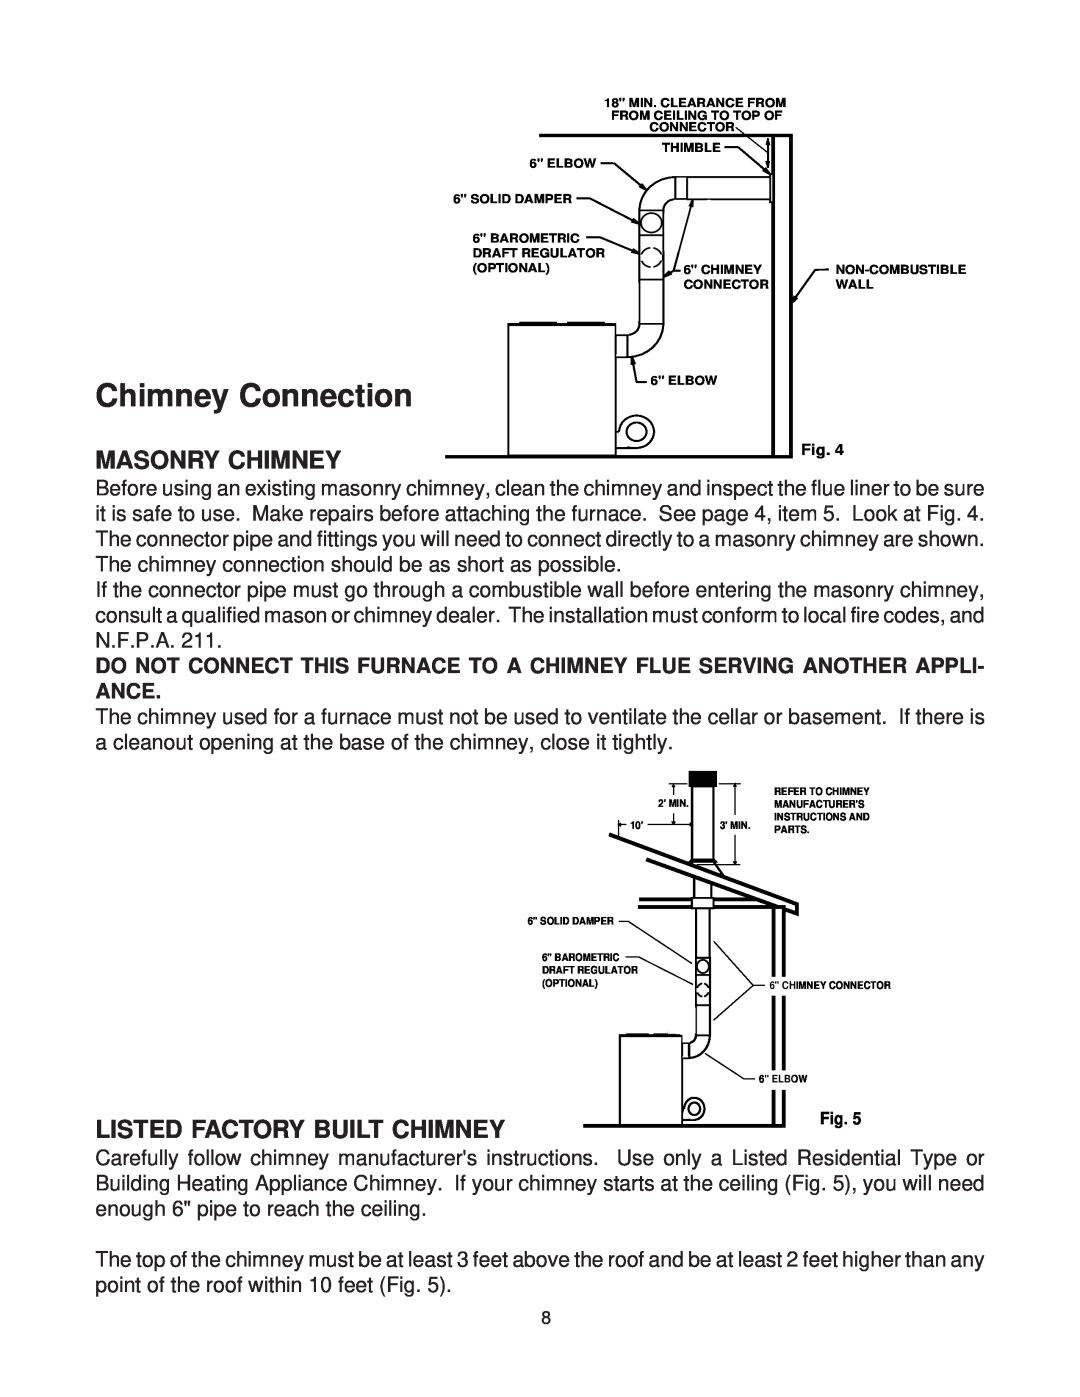 United States Stove 1303, AIR warranty Chimney Connection, Masonry Chimney, Listed Factory Built Chimney 